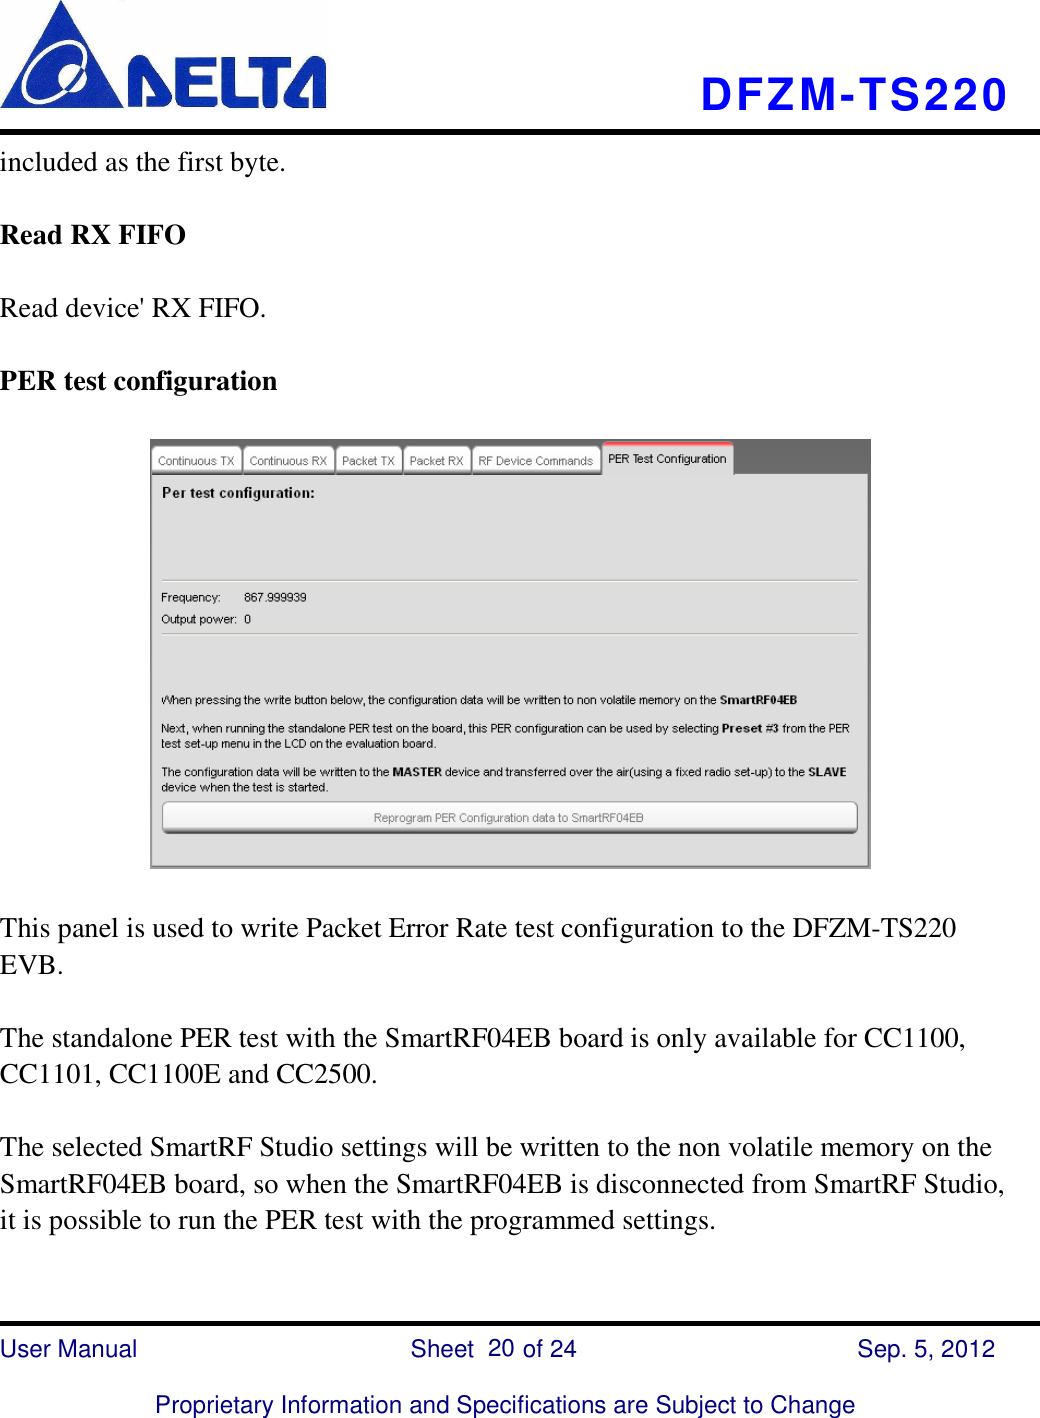    DFZM-TS220    User Manual                            Sheet        of 24      Sep. 5, 2012  Proprietary Information and Specifications are Subject to Change 20 included as the first byte.  Read RX FIFO  Read device&apos; RX FIFO.  PER test configuration    This panel is used to write Packet Error Rate test configuration to the DFZM-TS220 EVB.  The standalone PER test with the SmartRF04EB board is only available for CC1100, CC1101, CC1100E and CC2500.  The selected SmartRF Studio settings will be written to the non volatile memory on the SmartRF04EB board, so when the SmartRF04EB is disconnected from SmartRF Studio, it is possible to run the PER test with the programmed settings.  